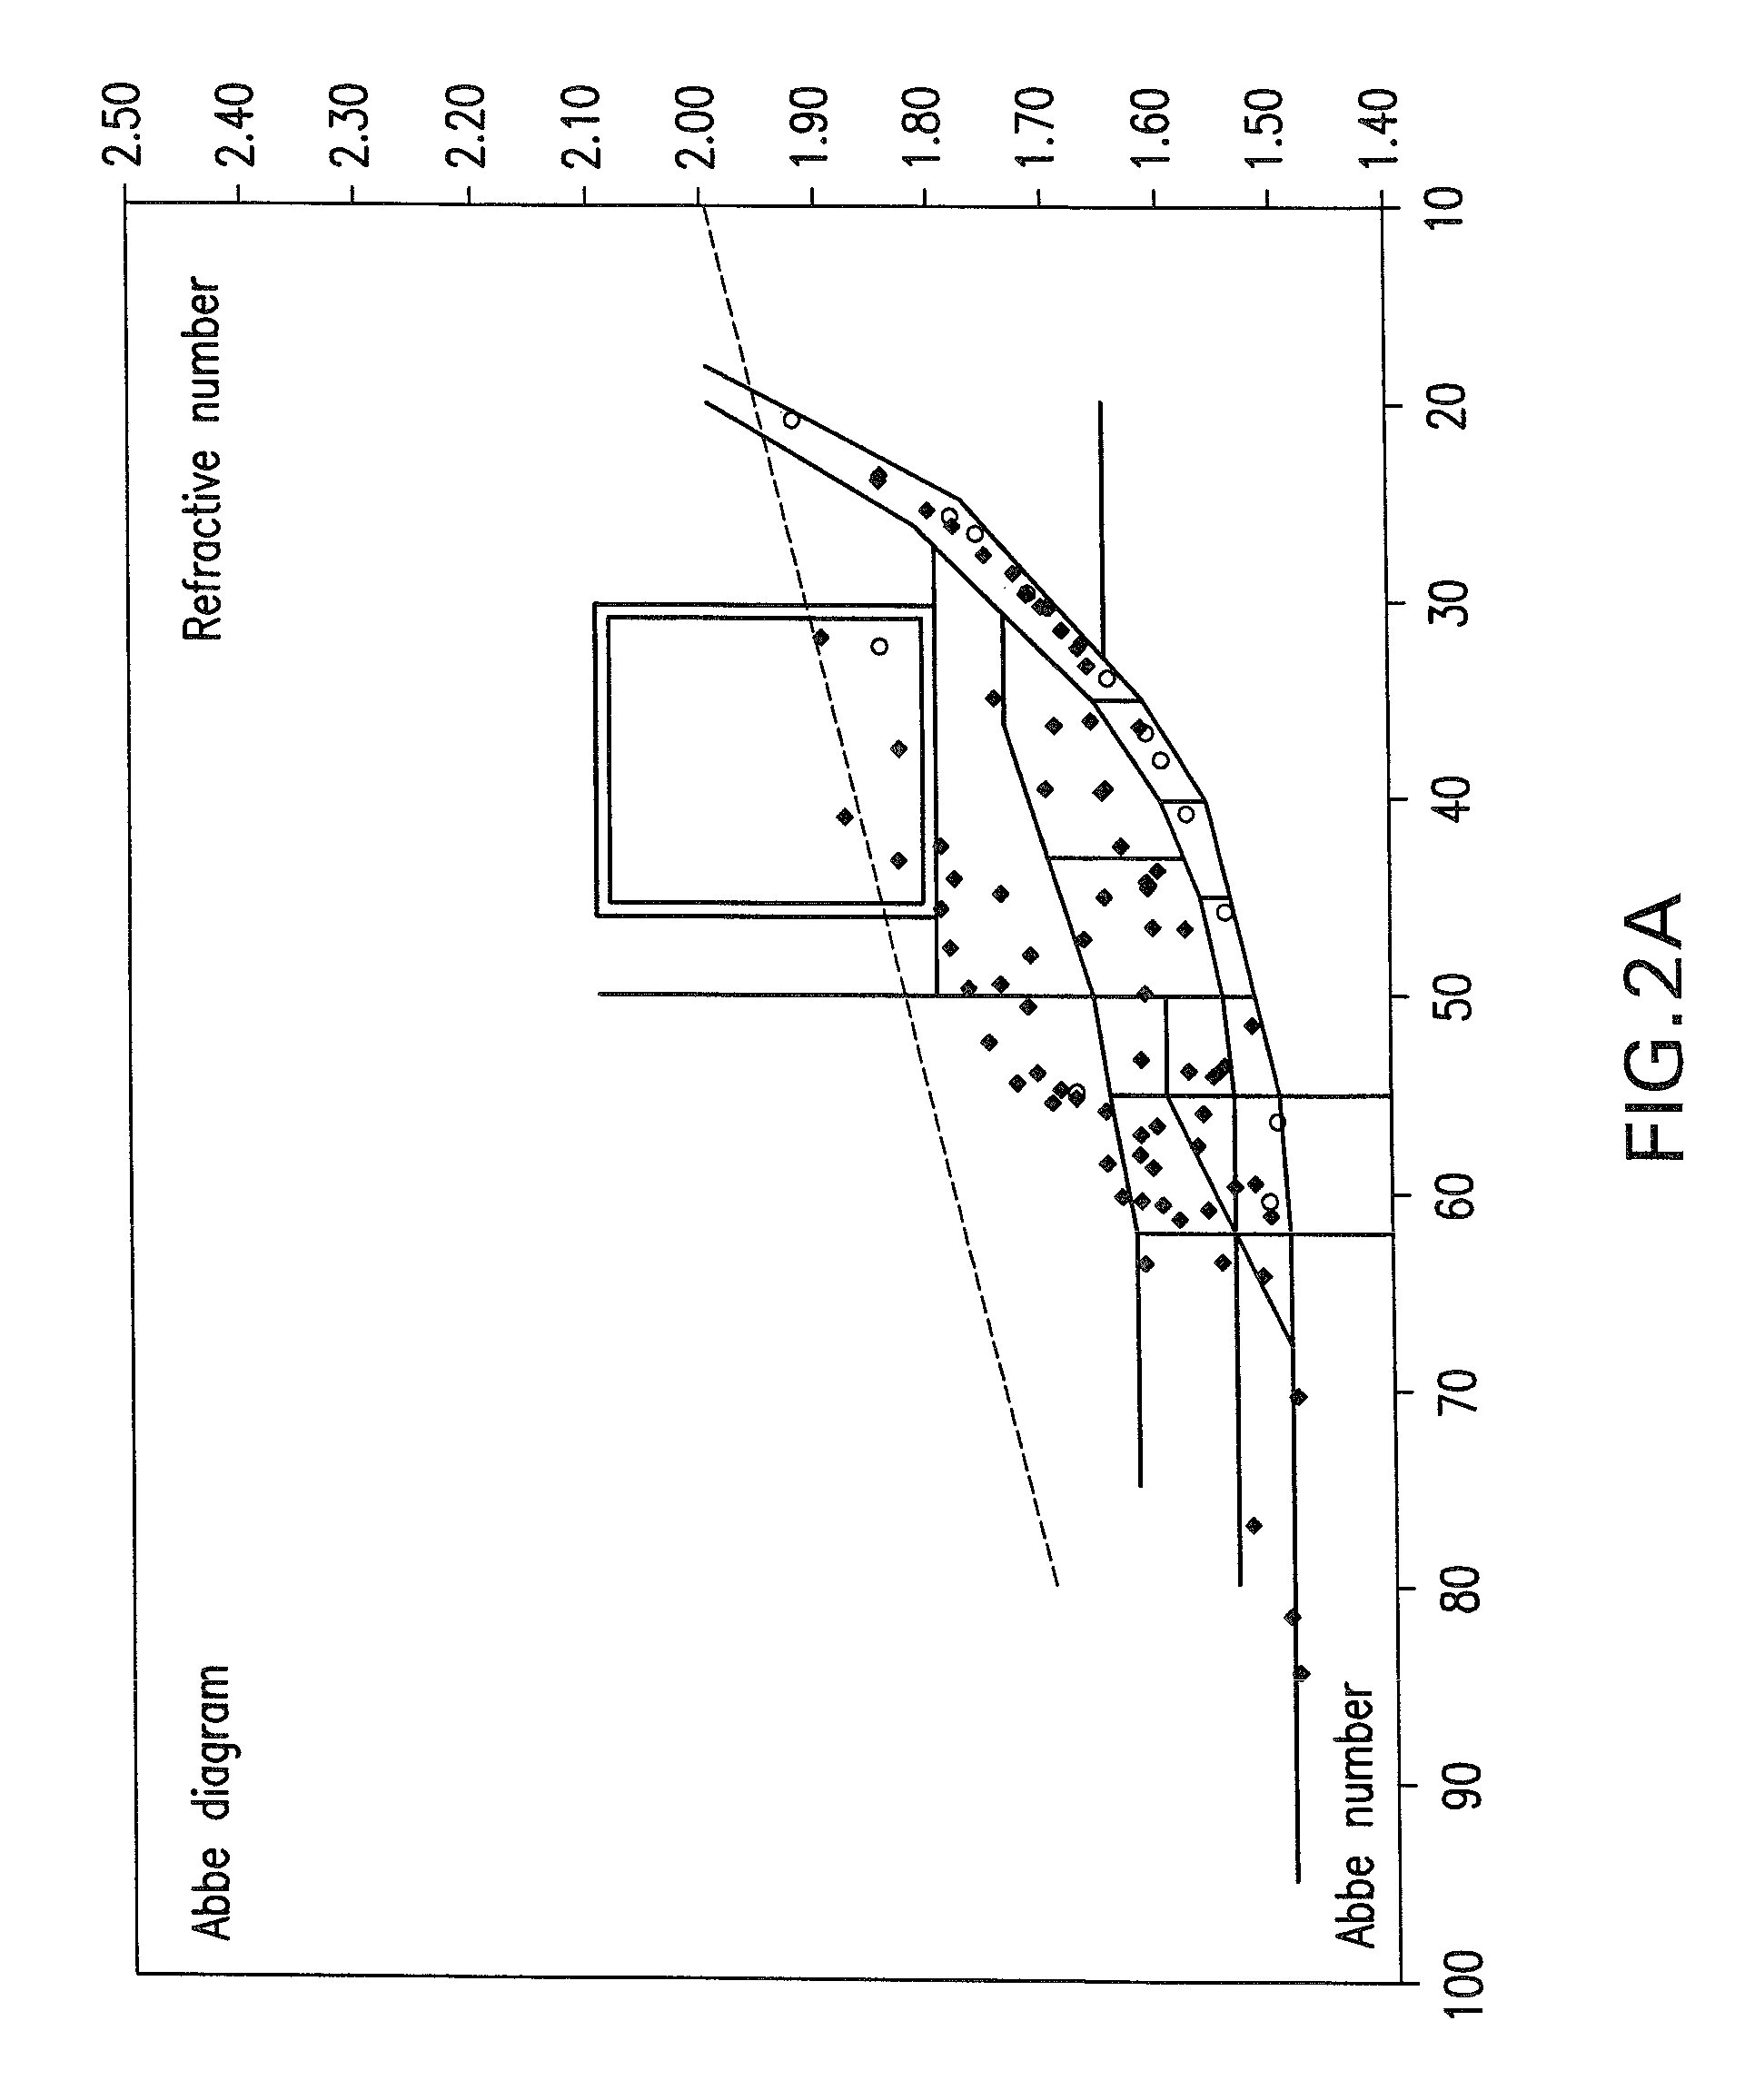 Optical elements made from ceramics comprising one or more oxides of Y, Sc, in and/or lanthanide elements and mapping optics including the optical elements